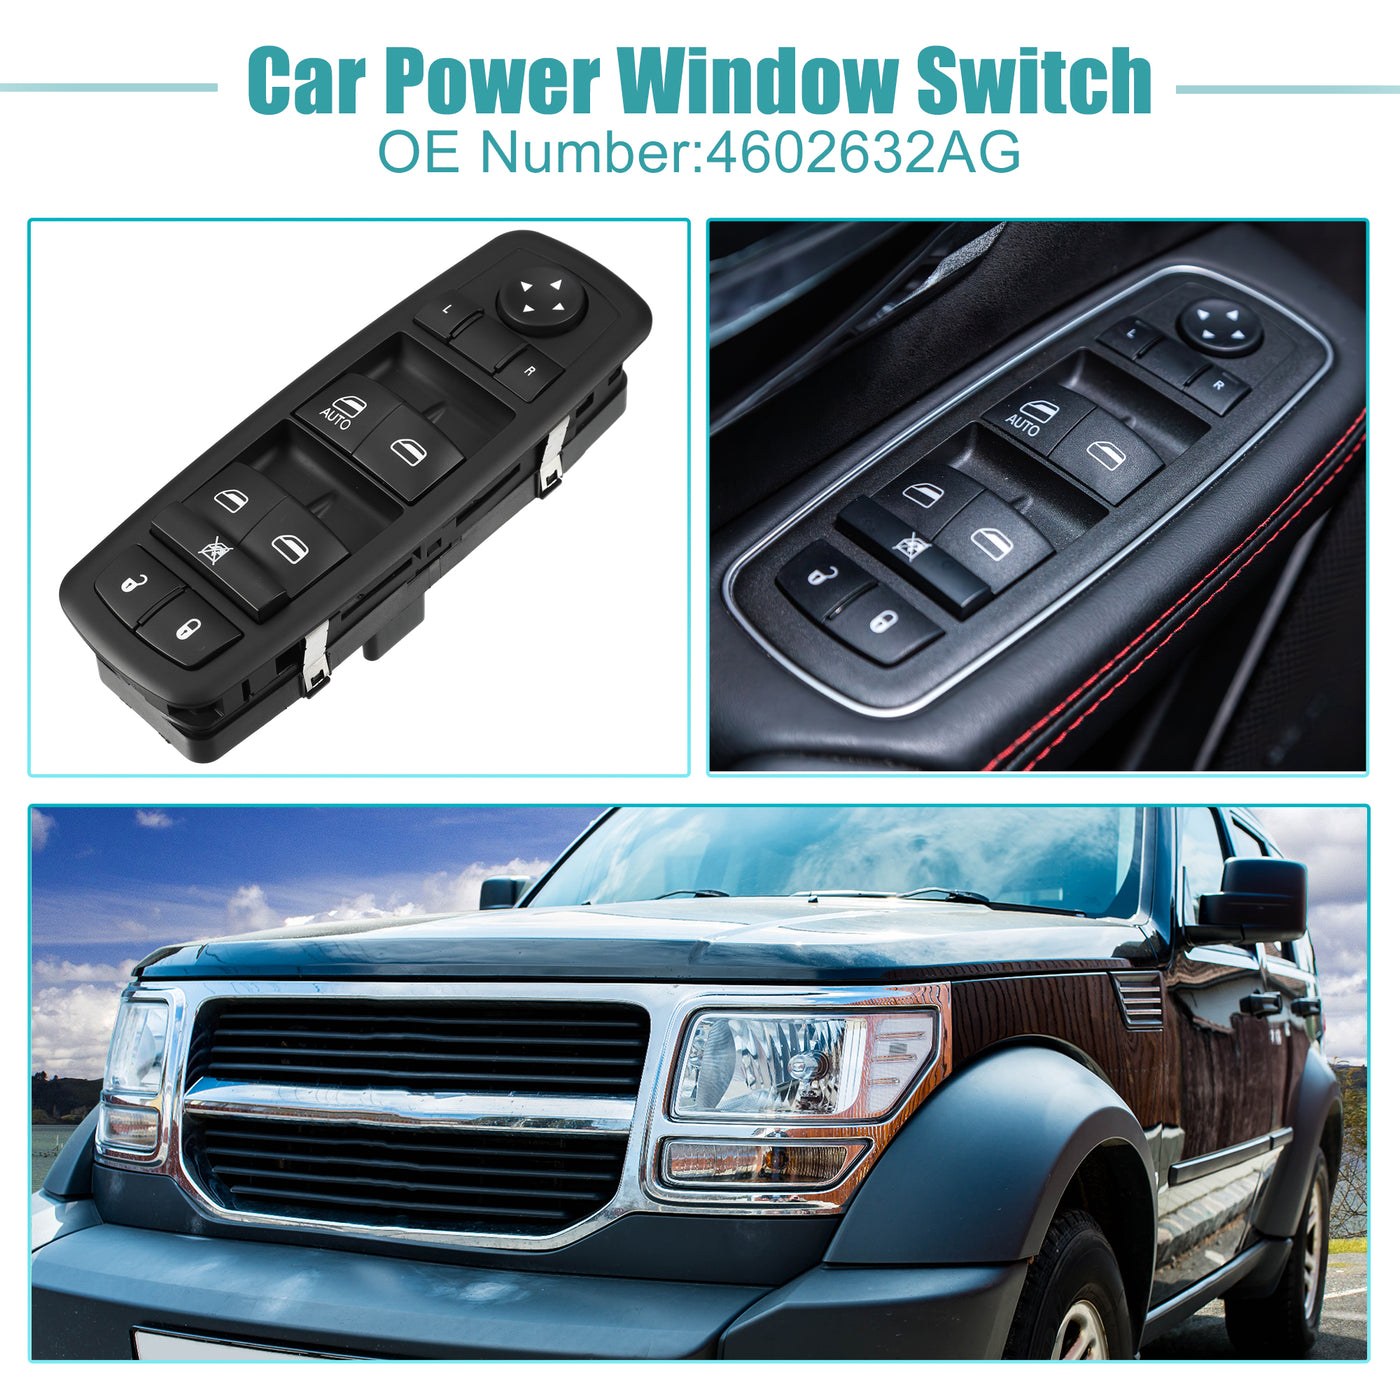 ACROPIX Power Window Switch Window Control Switch Fit for Dodge Journey 2009 for Dodge Nitro 2007 for Jeep Liberty 2008 2009 2012 No.4602632AG - Pack of 1